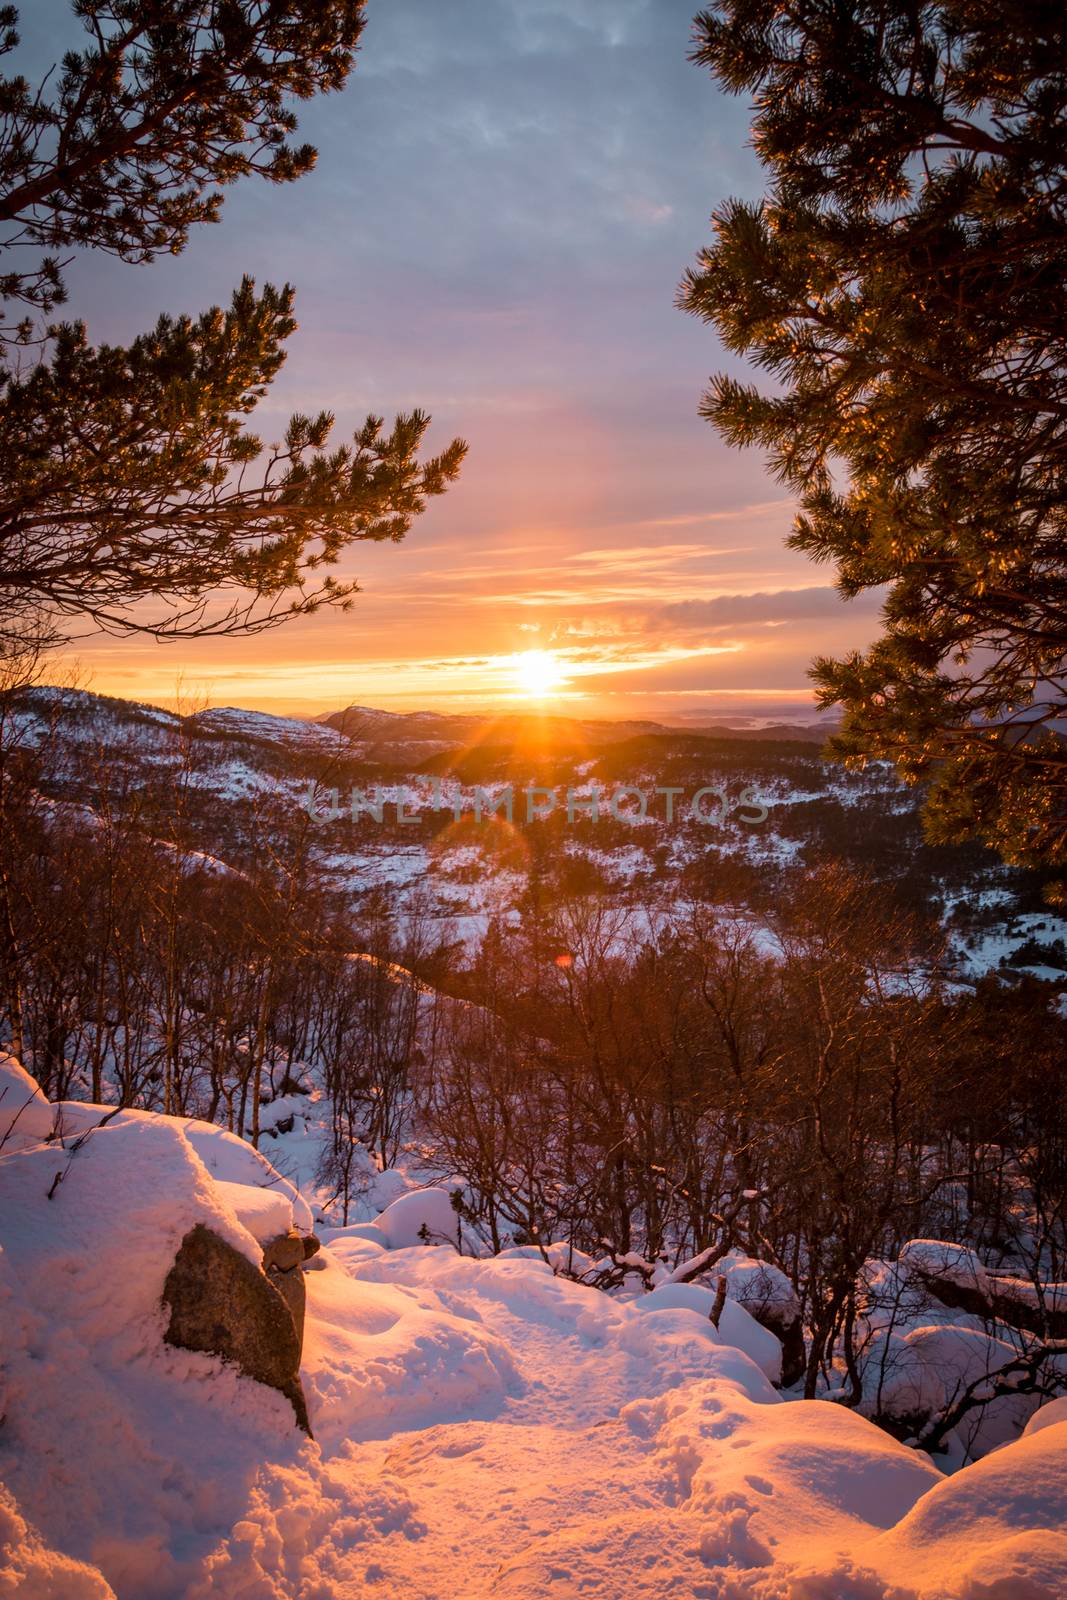 Sunset over snow covered landscape with trees by MXW_Stock